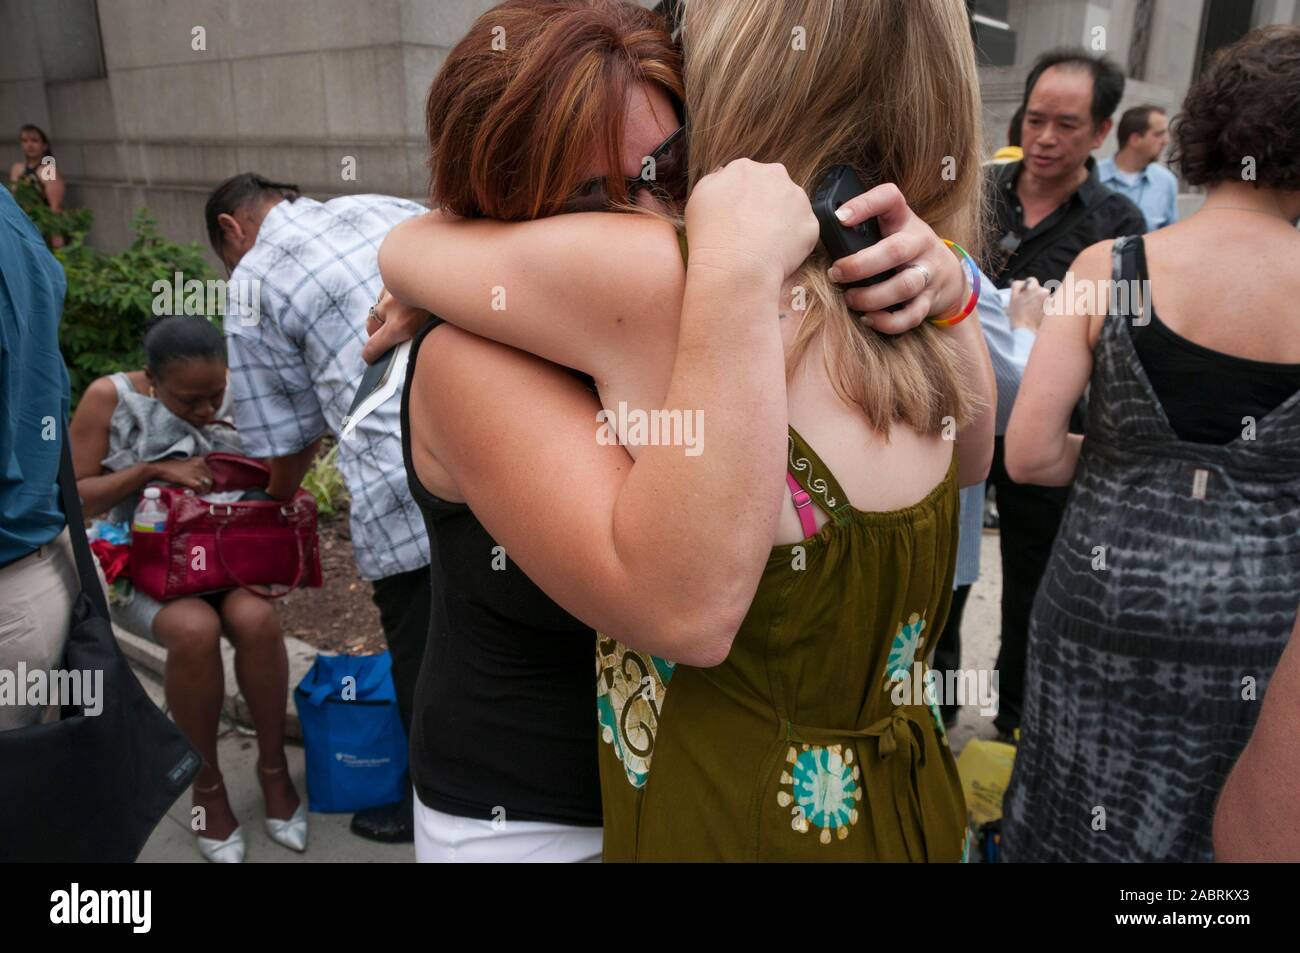 An emotional lesbian couple embraces outside the Manhattan City Clerk's office on the first day of legal same-sex marriage in New York State, USA. Stock Photo